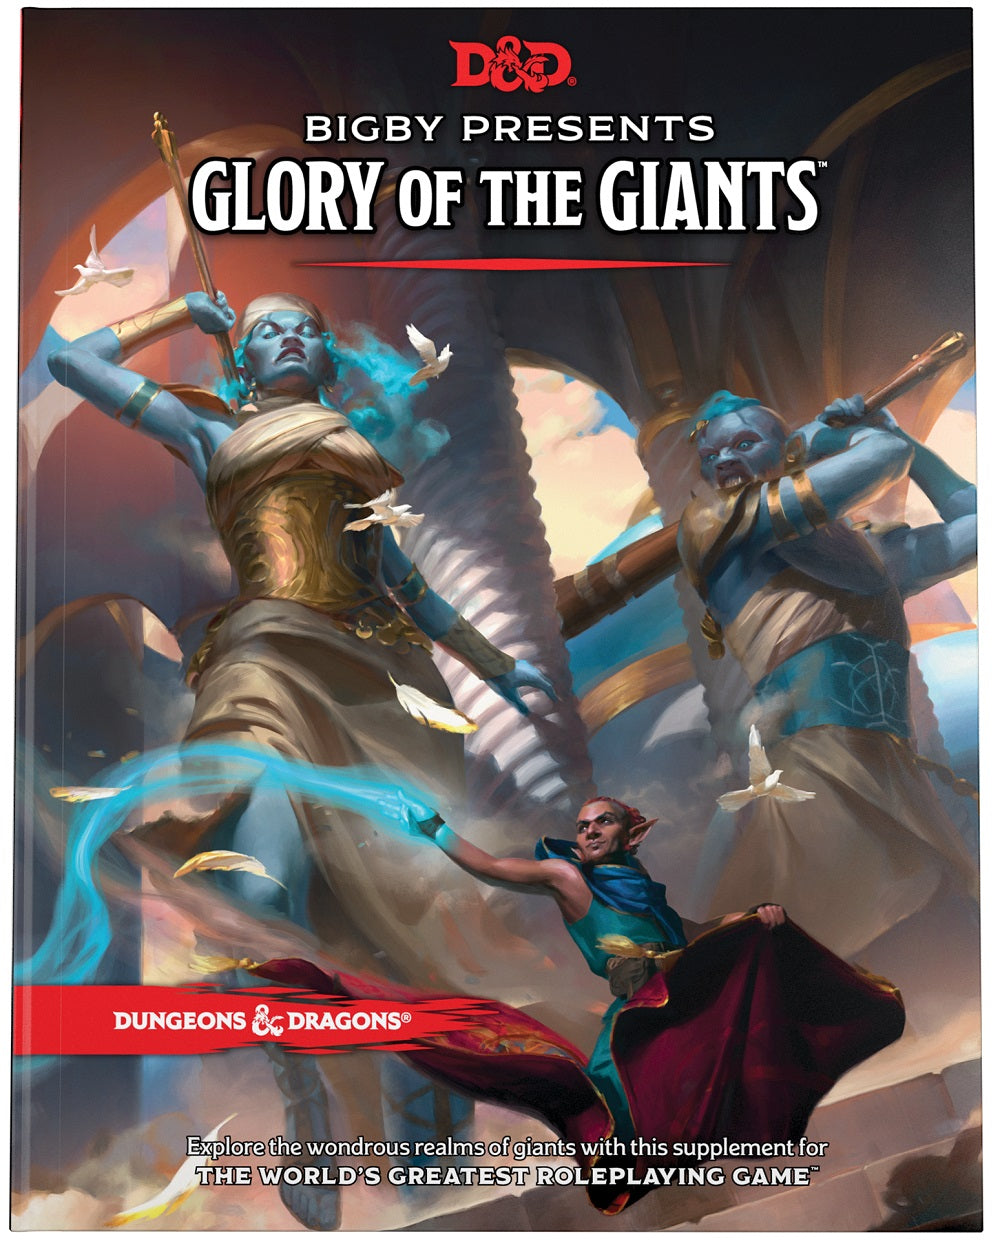 Dungeons & Dragons: Bigby Presents - Glory of the Giants